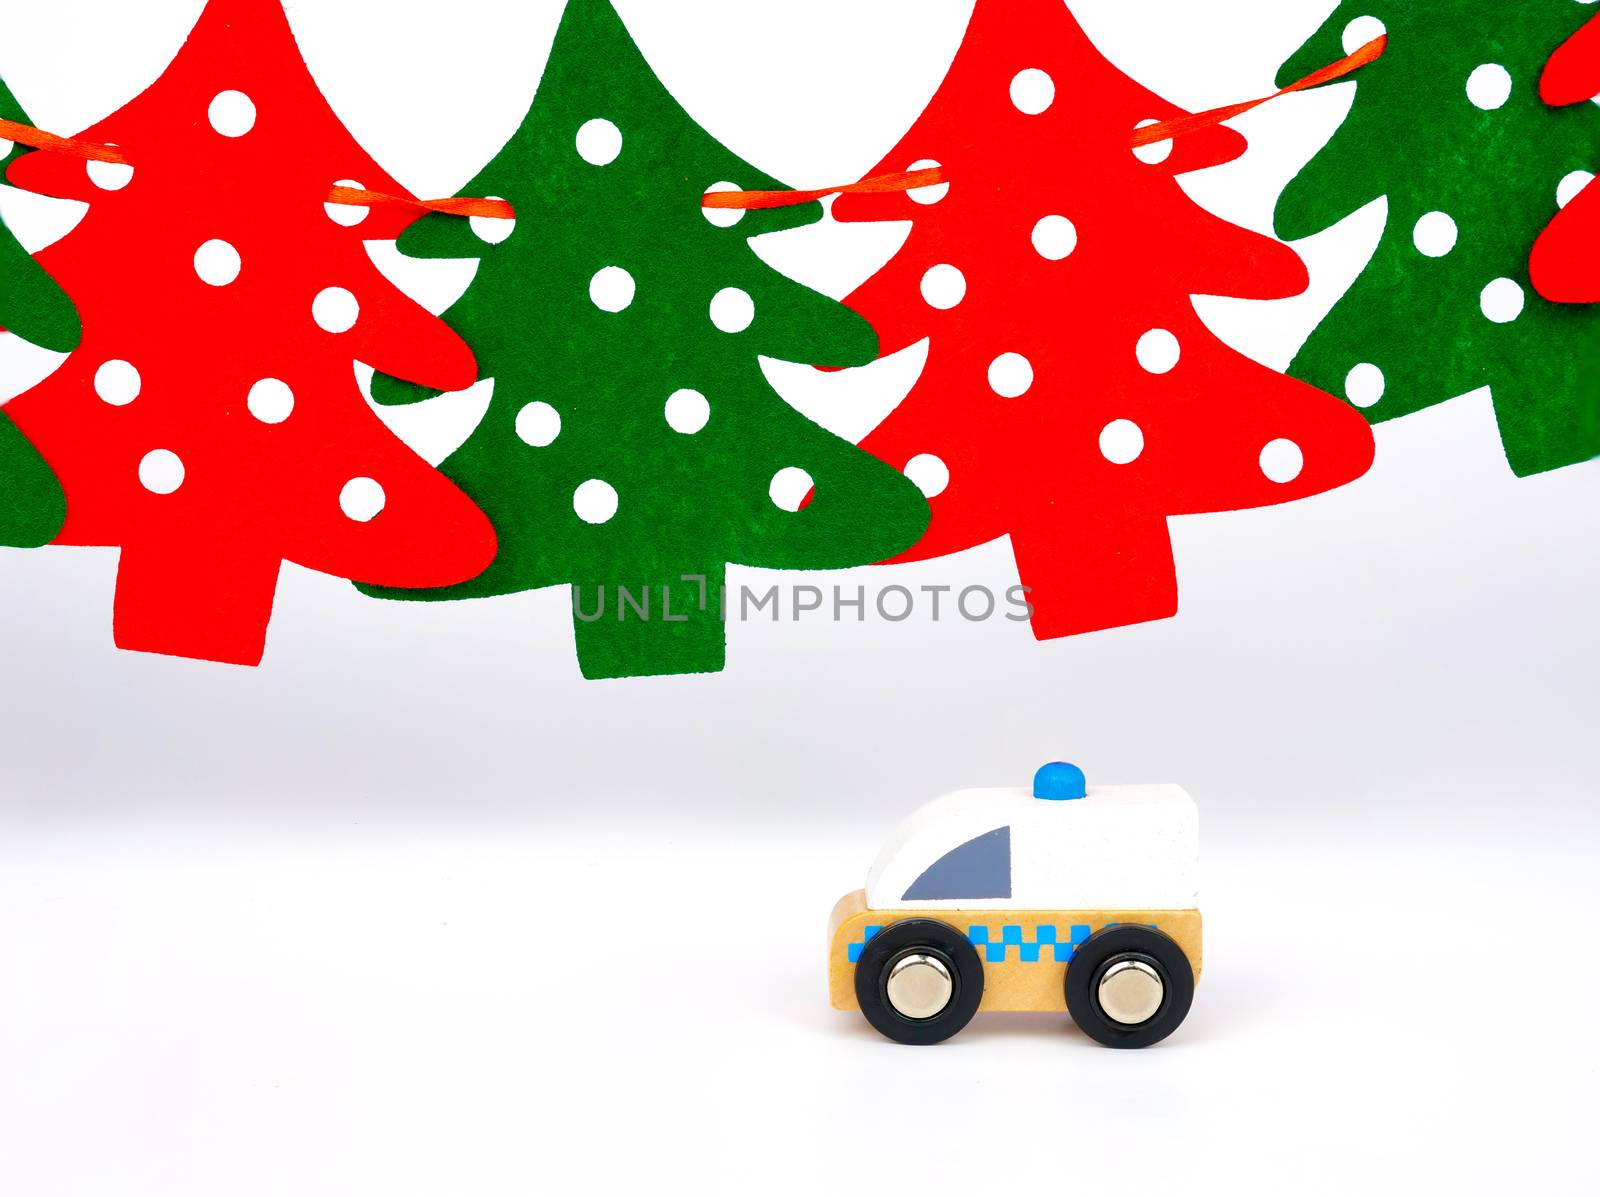 toy ambulance, red and green pine trees background, emergency service during holiday seasons concept